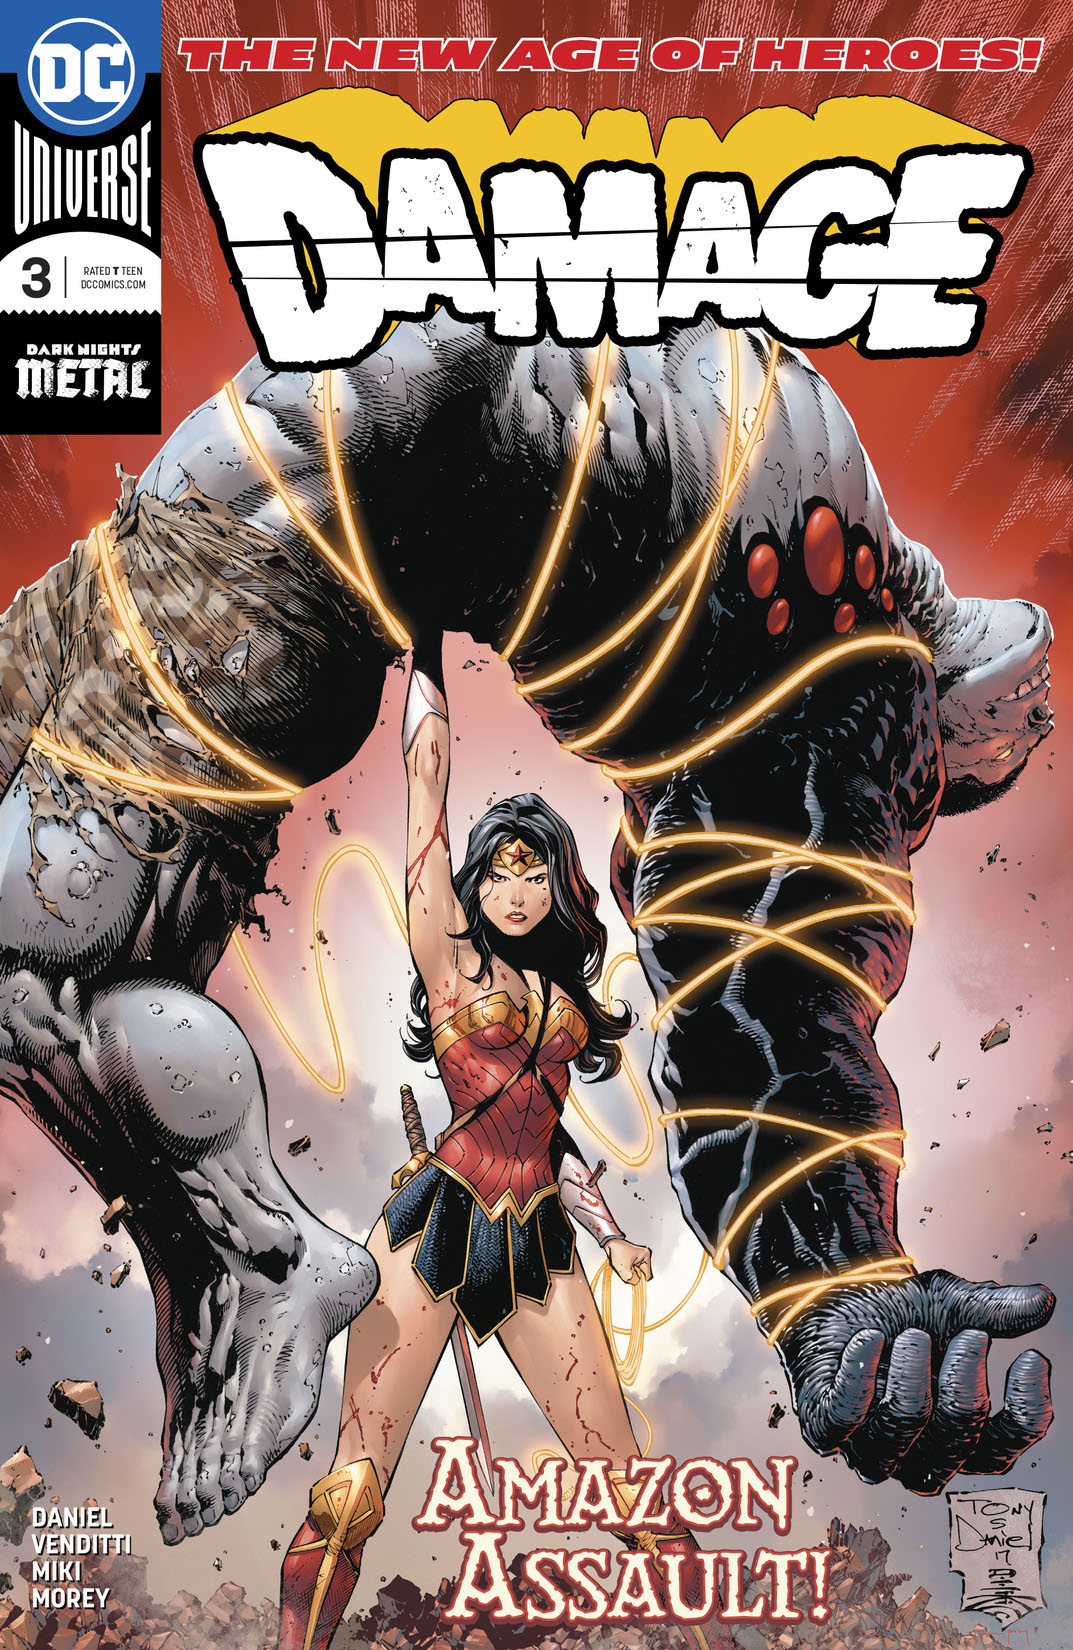 Damage (2018-) #3 preview images